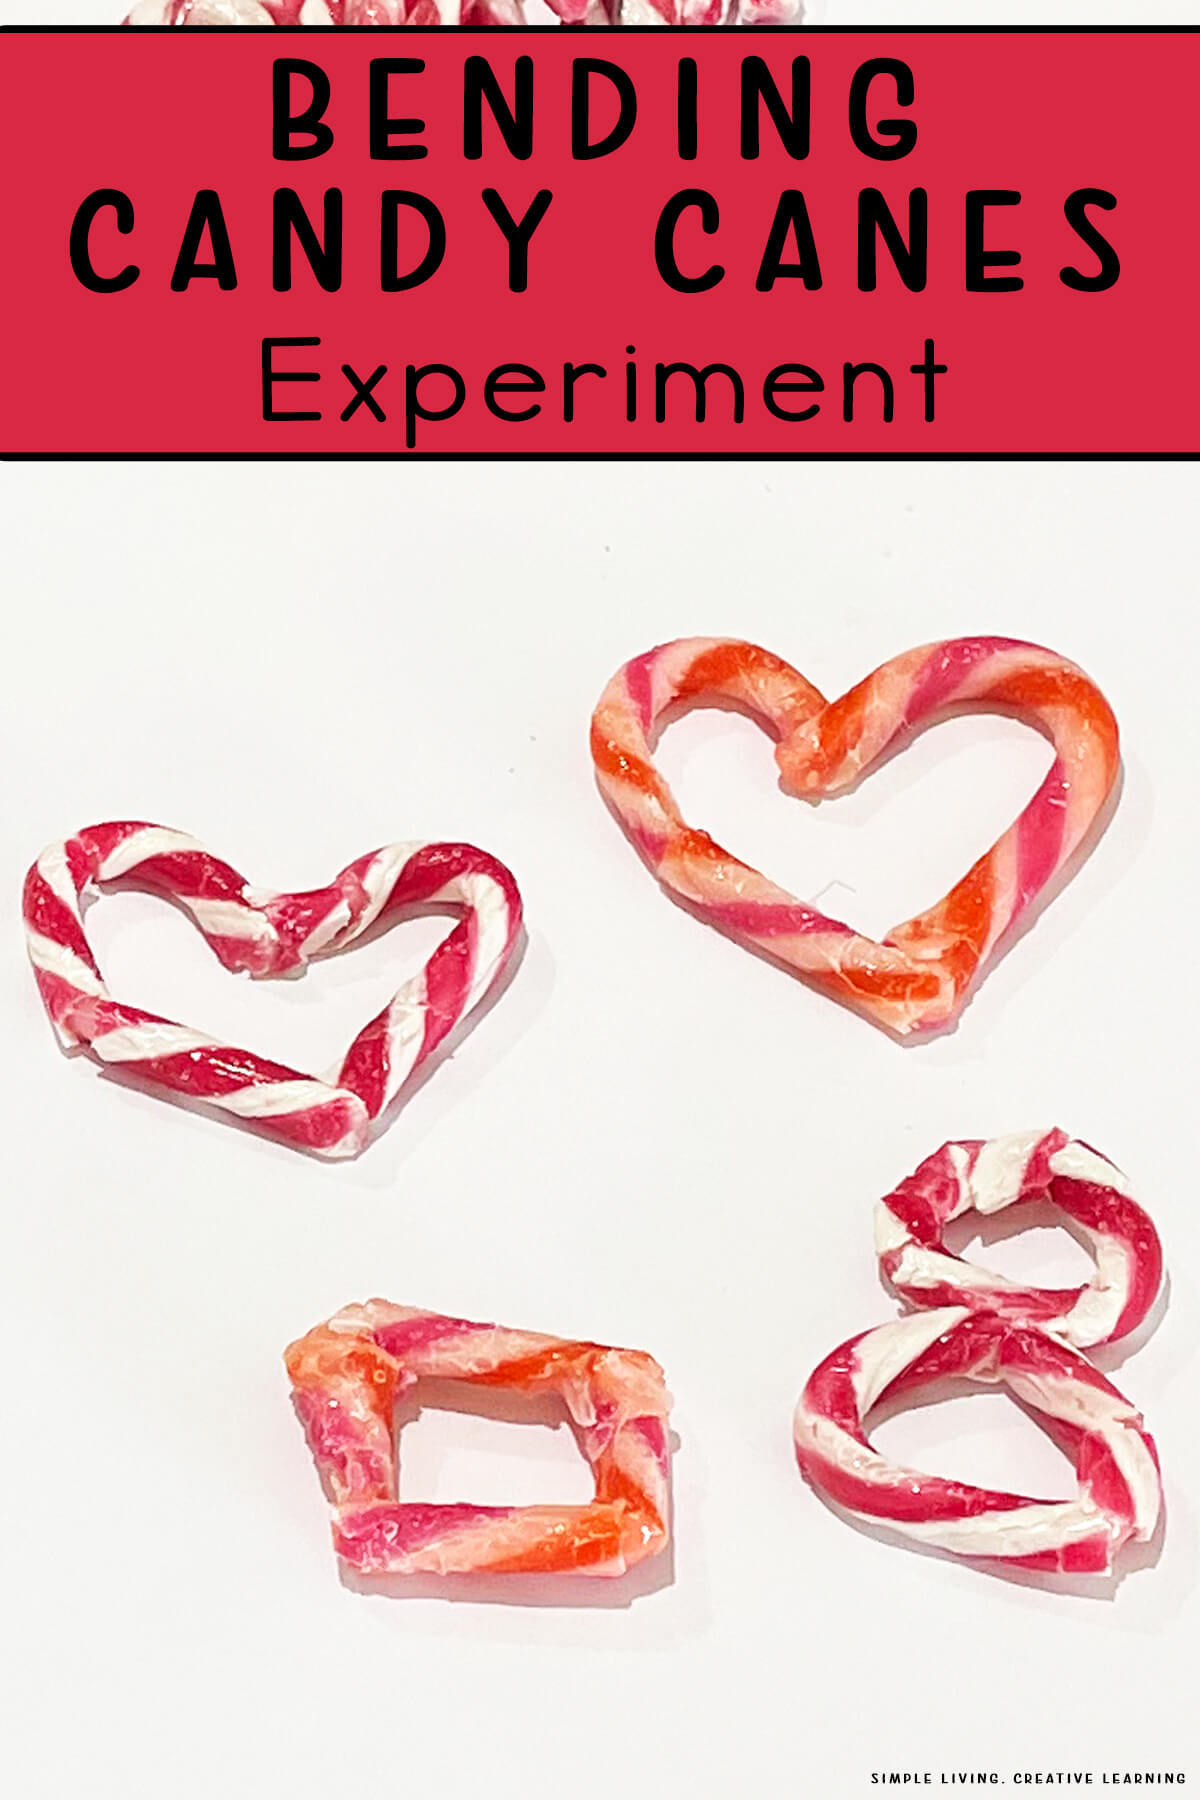 Bendy Candy Cane Experiment